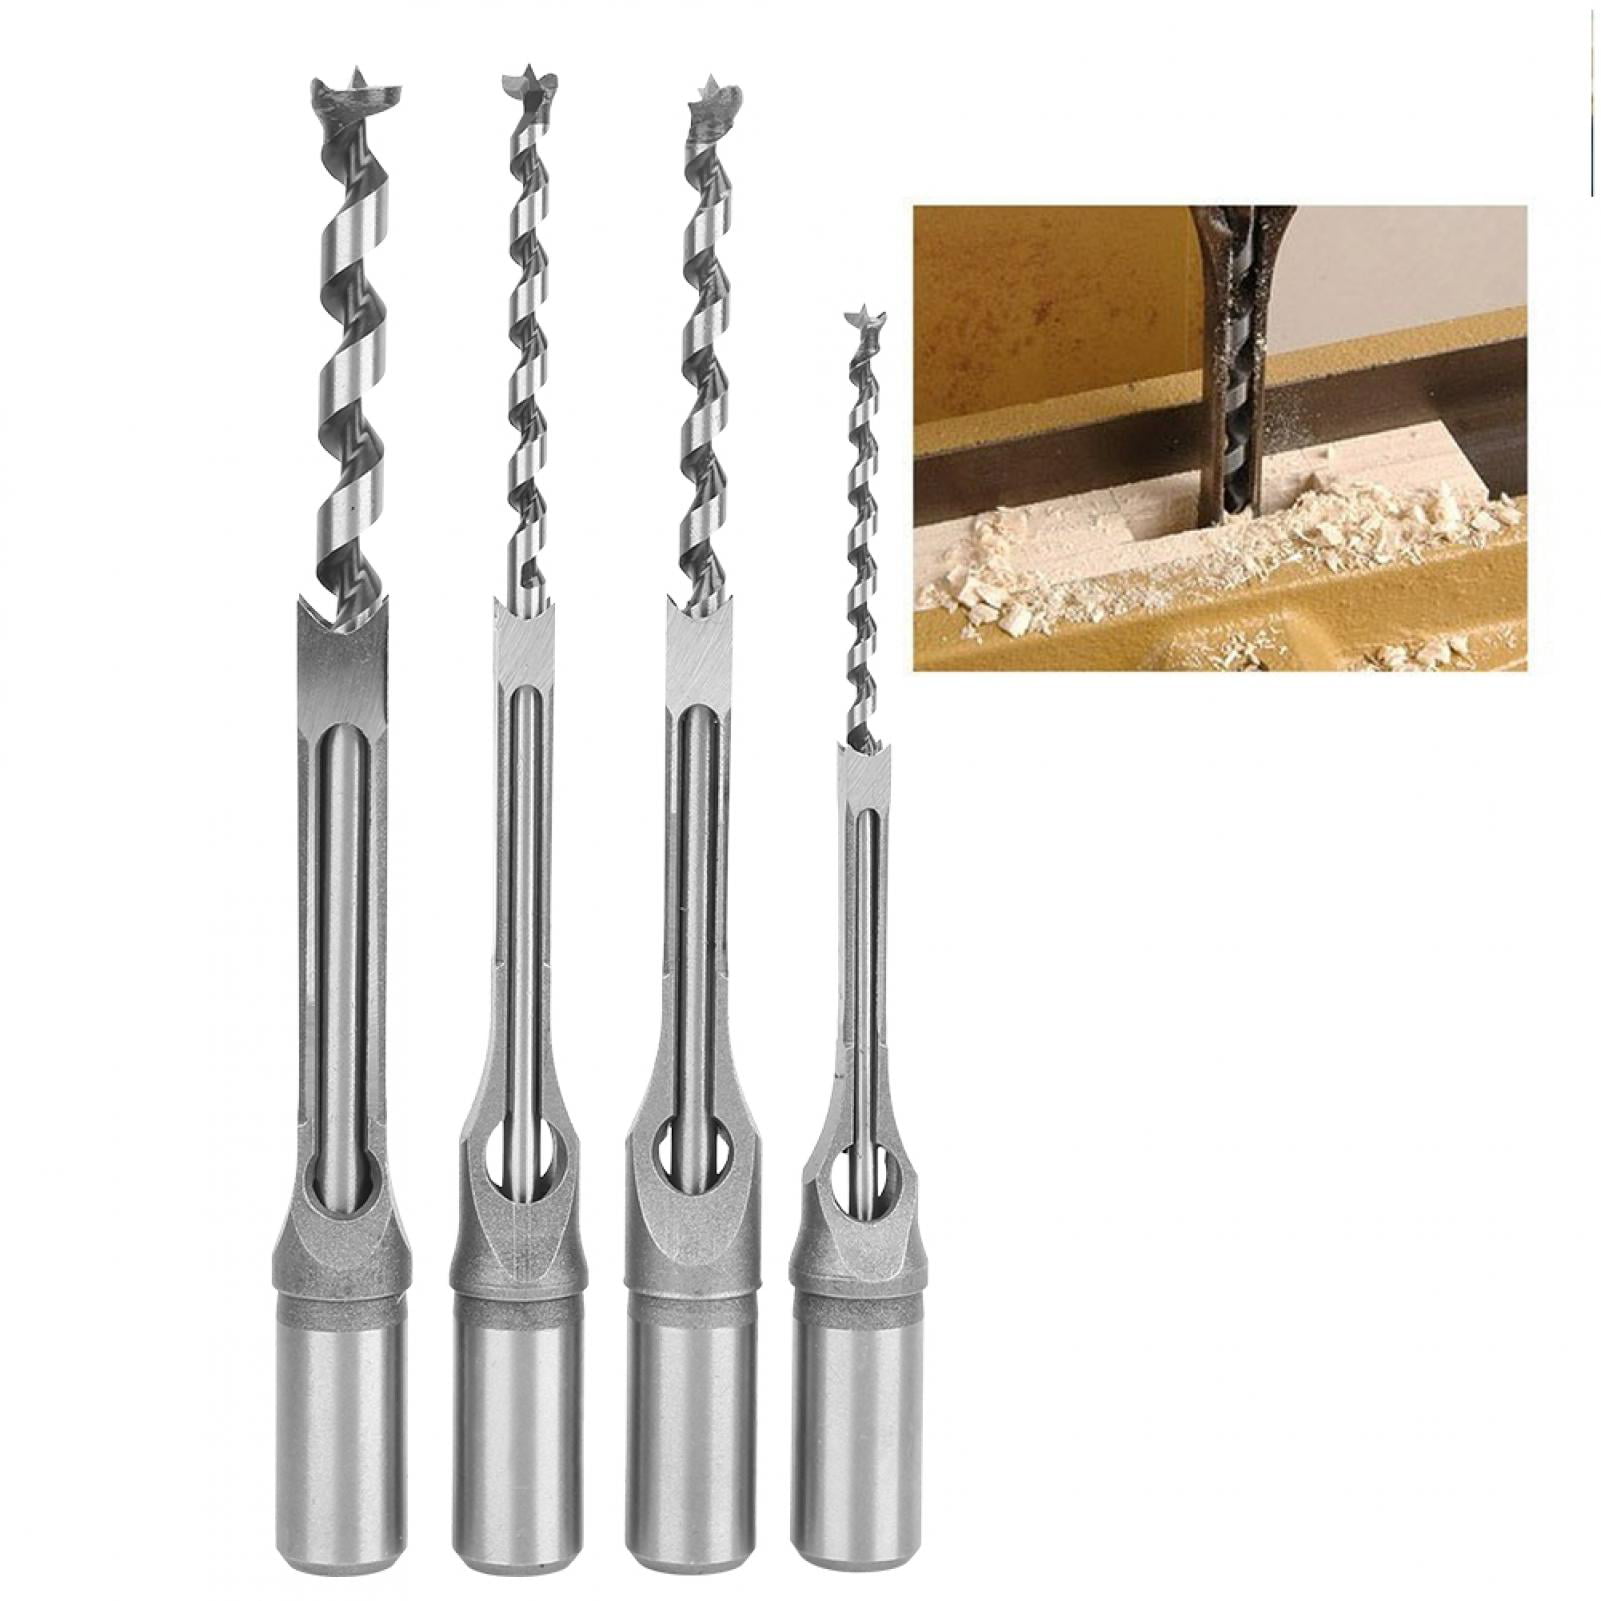 Durable 4pcs Woodworking Square Hole Drill Bits for Density Board 